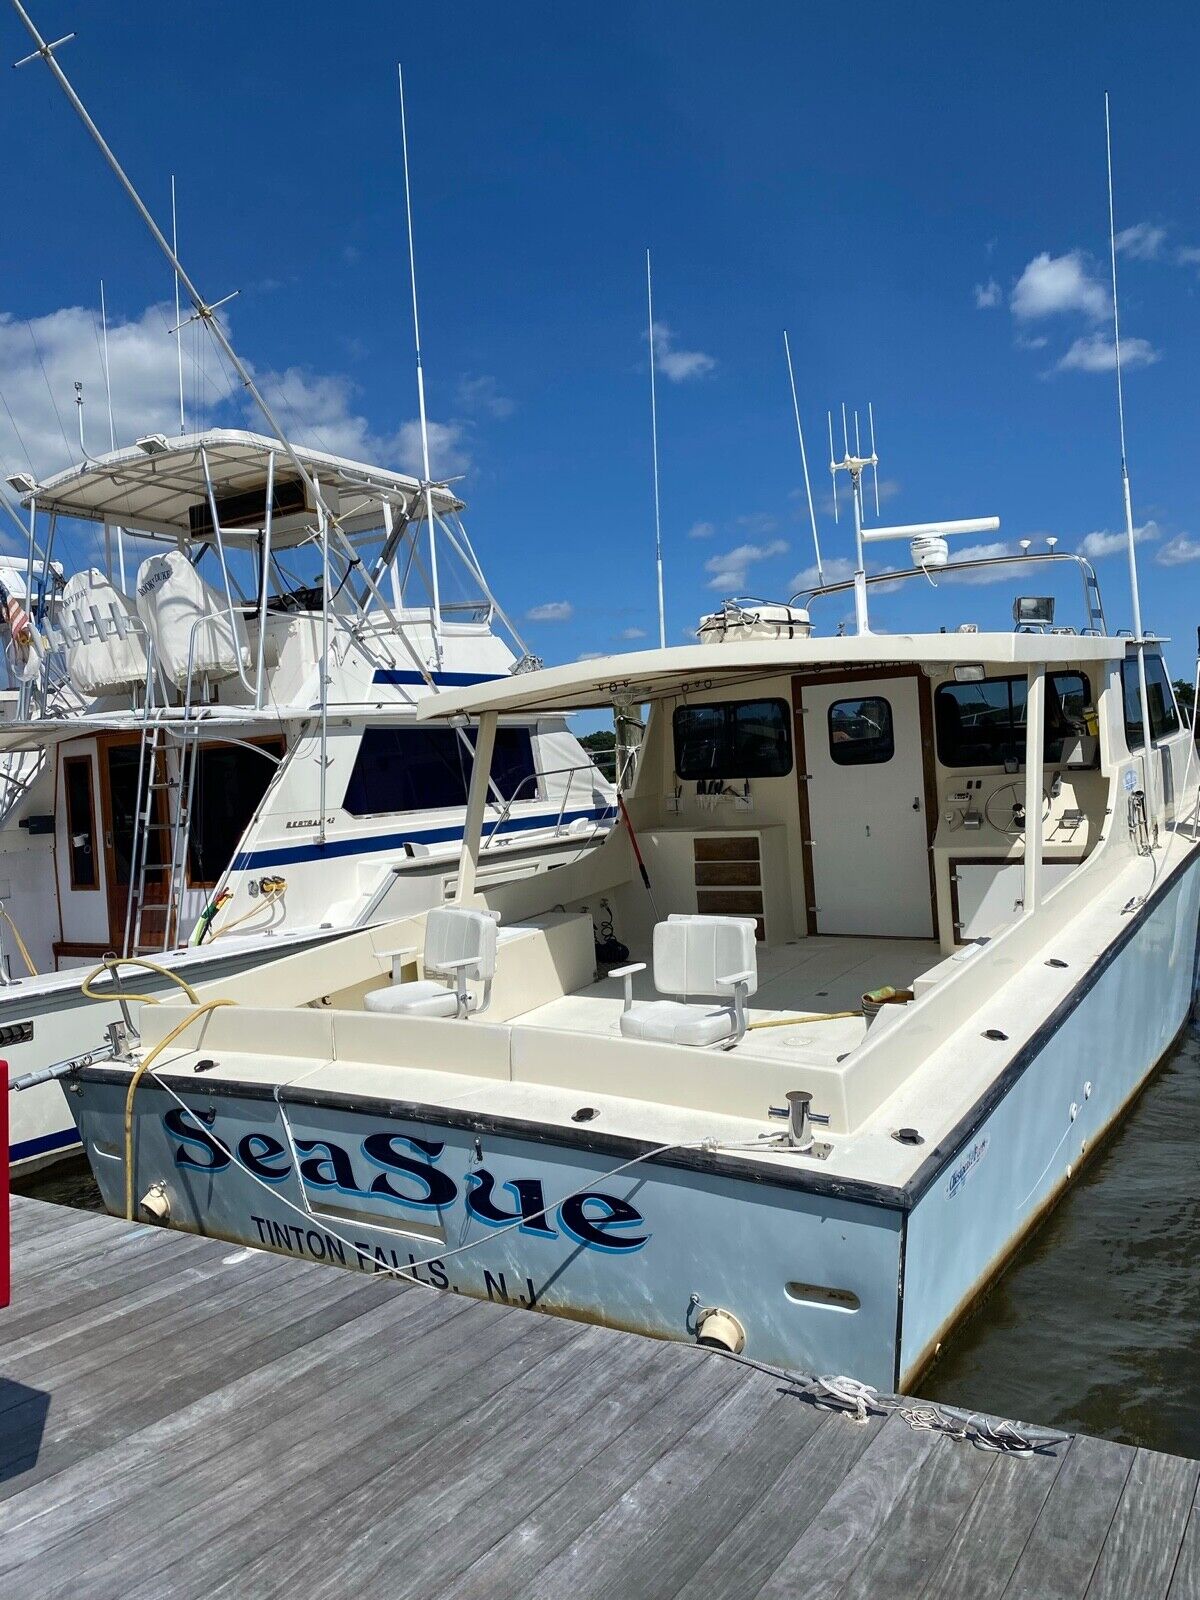 2003 Documented Chesapeake Boat Custom Built With 48 Foot By 15 Foot Beam.